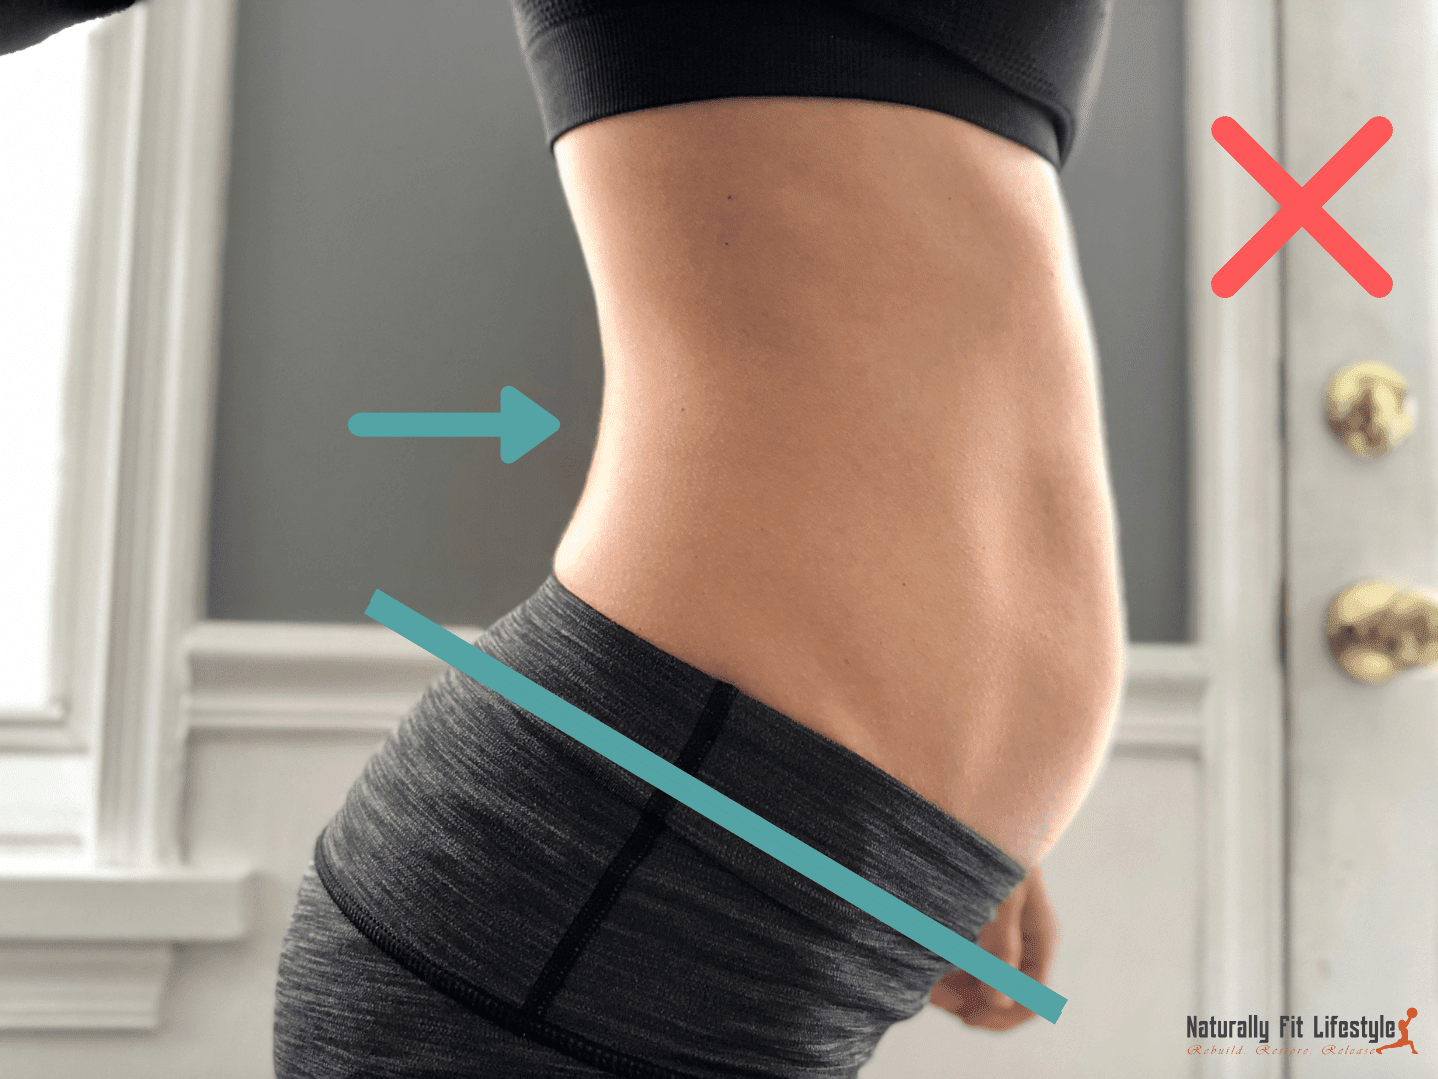 Diastasis Recti: What Is It And What To Do About It ⋆ Naturally Fit  Lifestyle